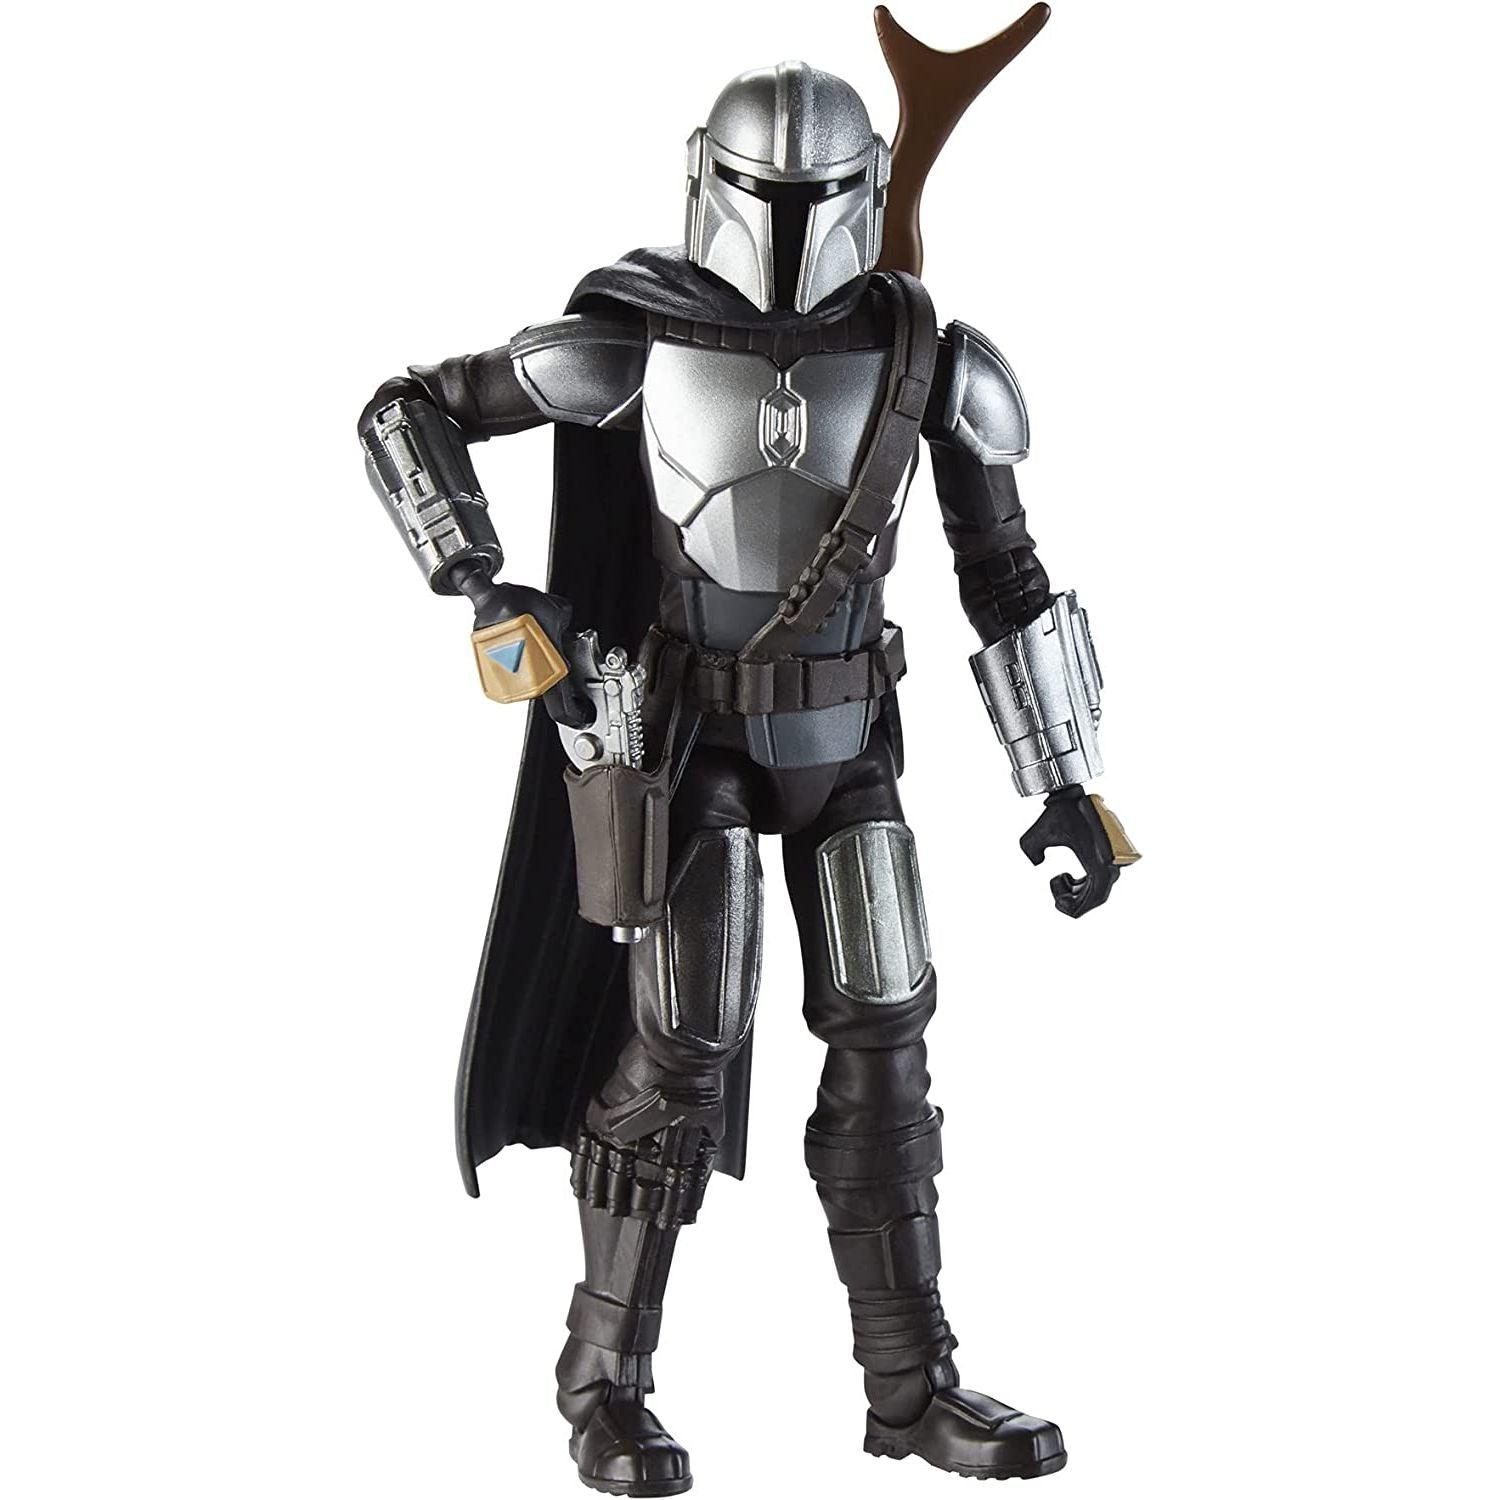 STAR WARS Galaxy of Adventures The Mandalorian 5-Inch-Scale Figure - BumbleToys - 5-7 Years, Action Figures, Boys, Figures, Mandalorian, Pre-Order, star wars